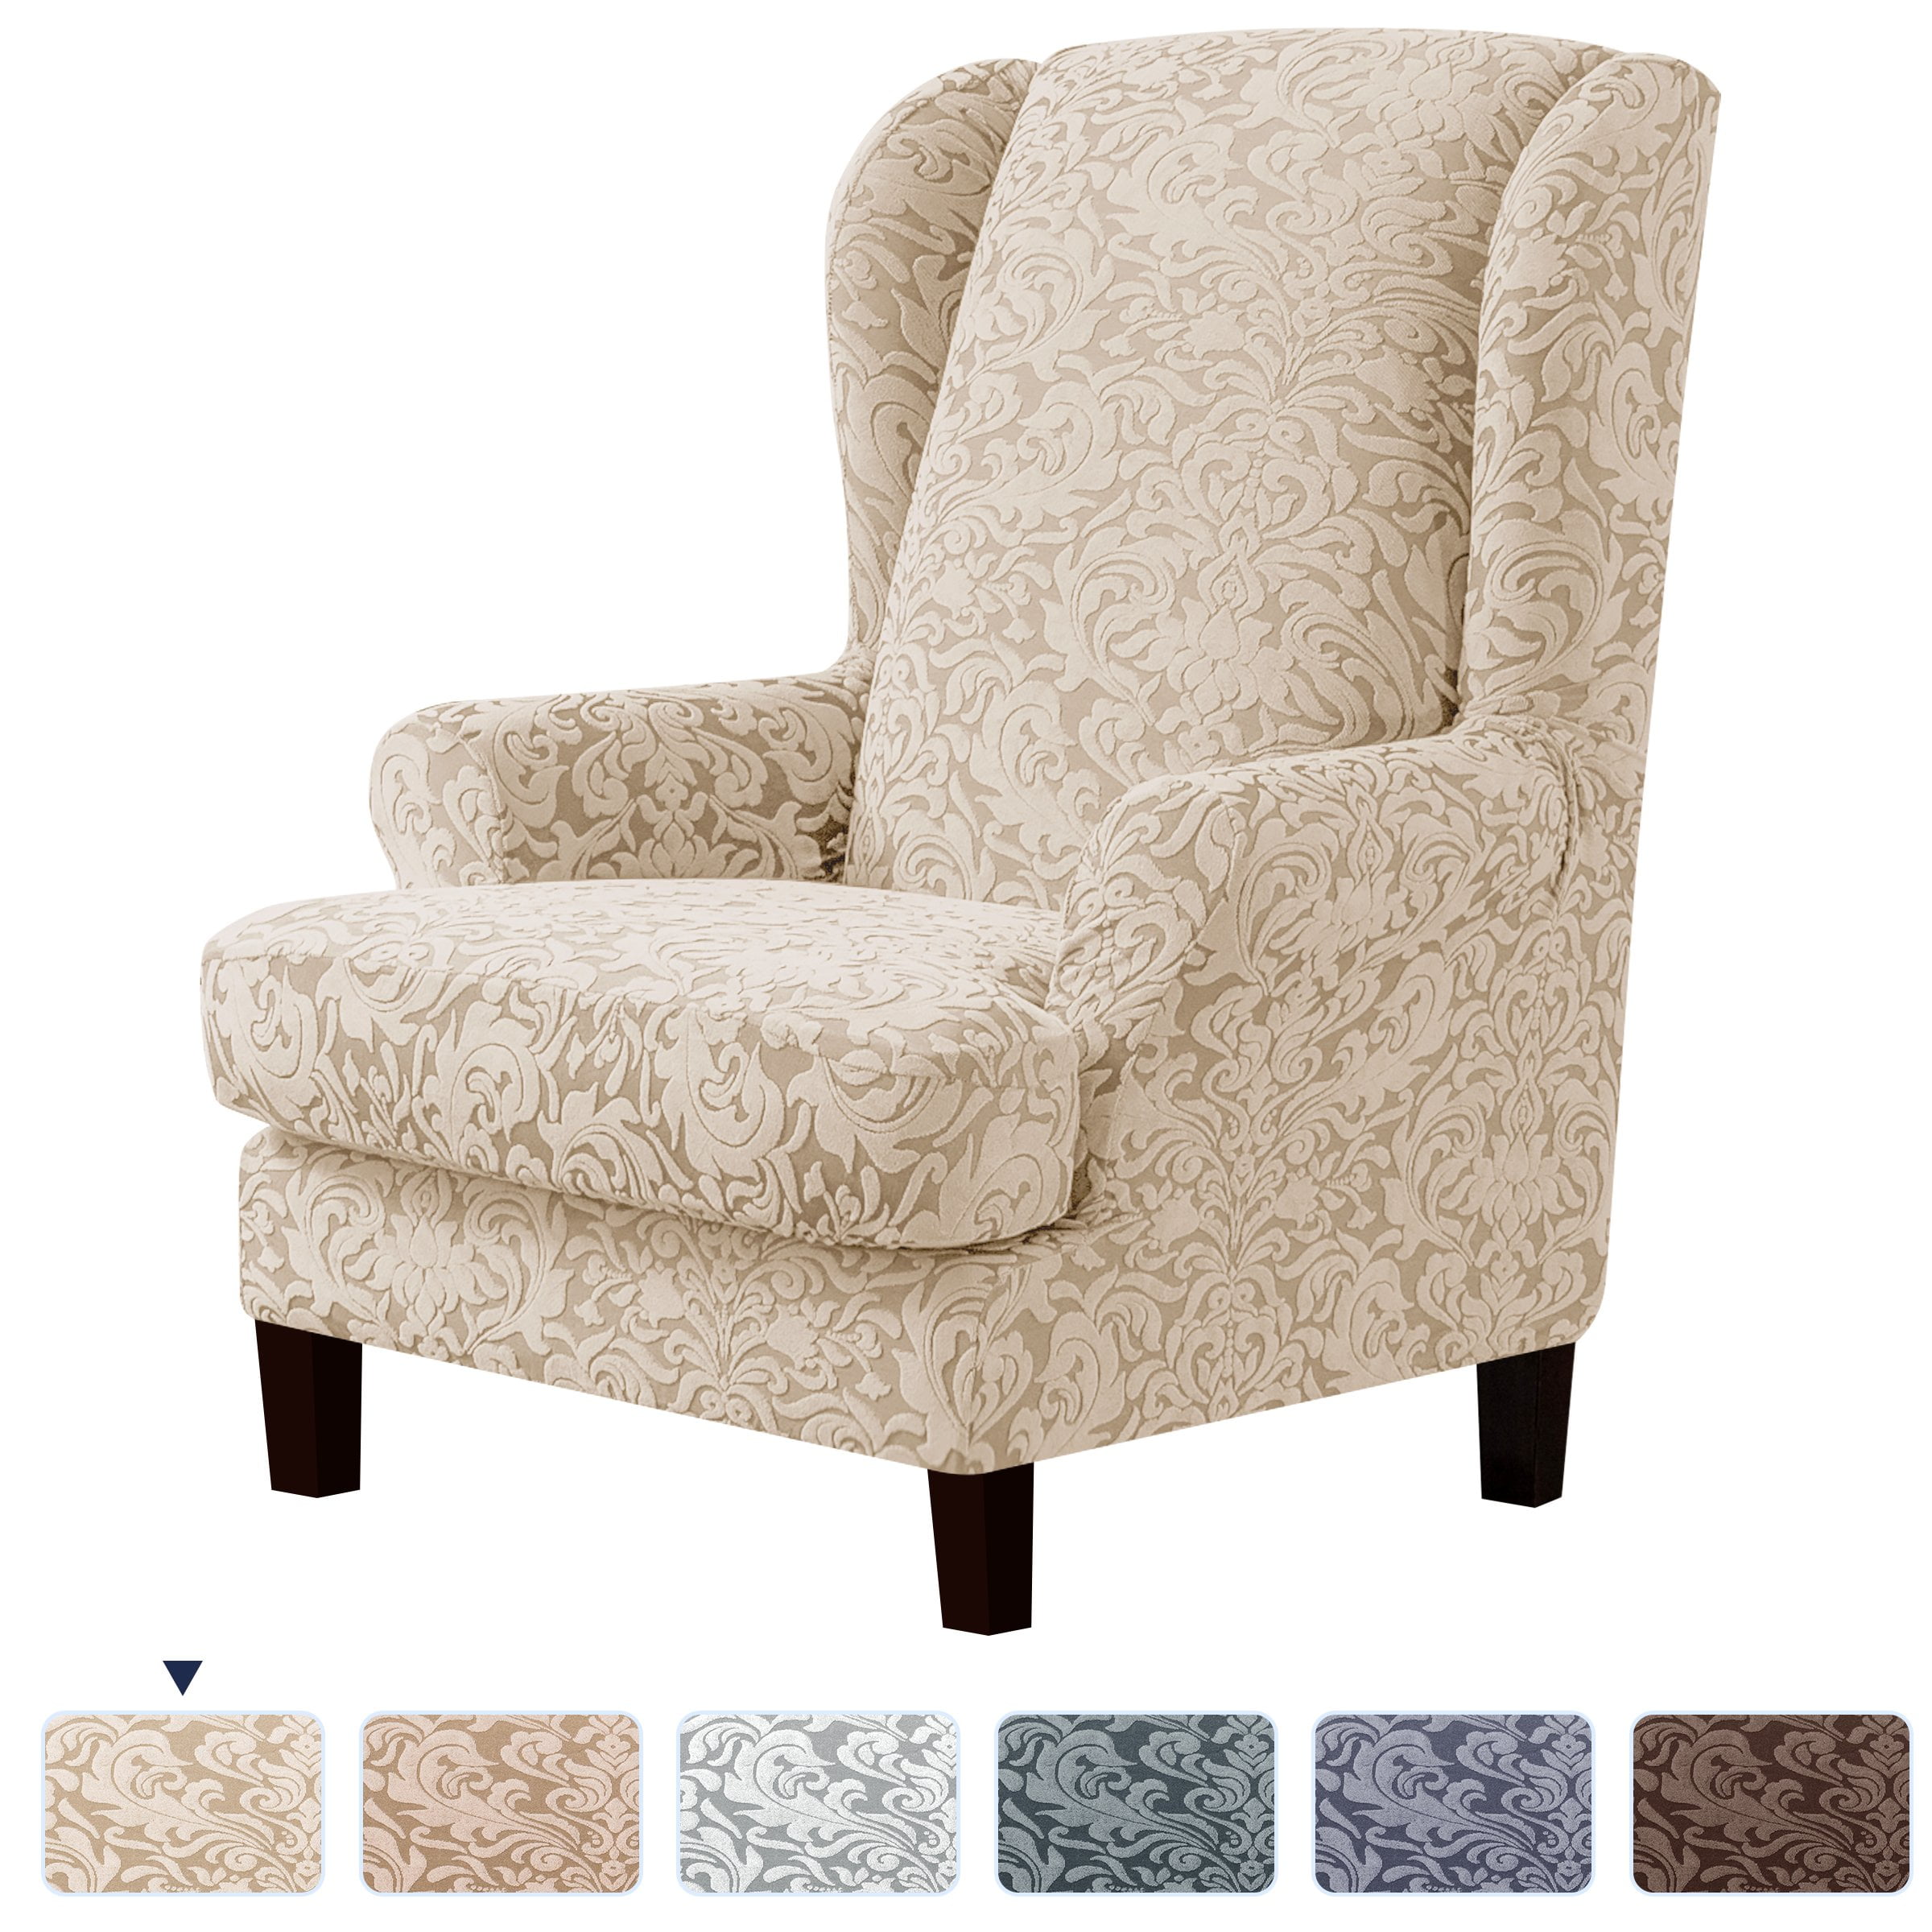 Stretch Jacquard Wingback Armchair Cover One-piece Wing back Couch Slipcover 